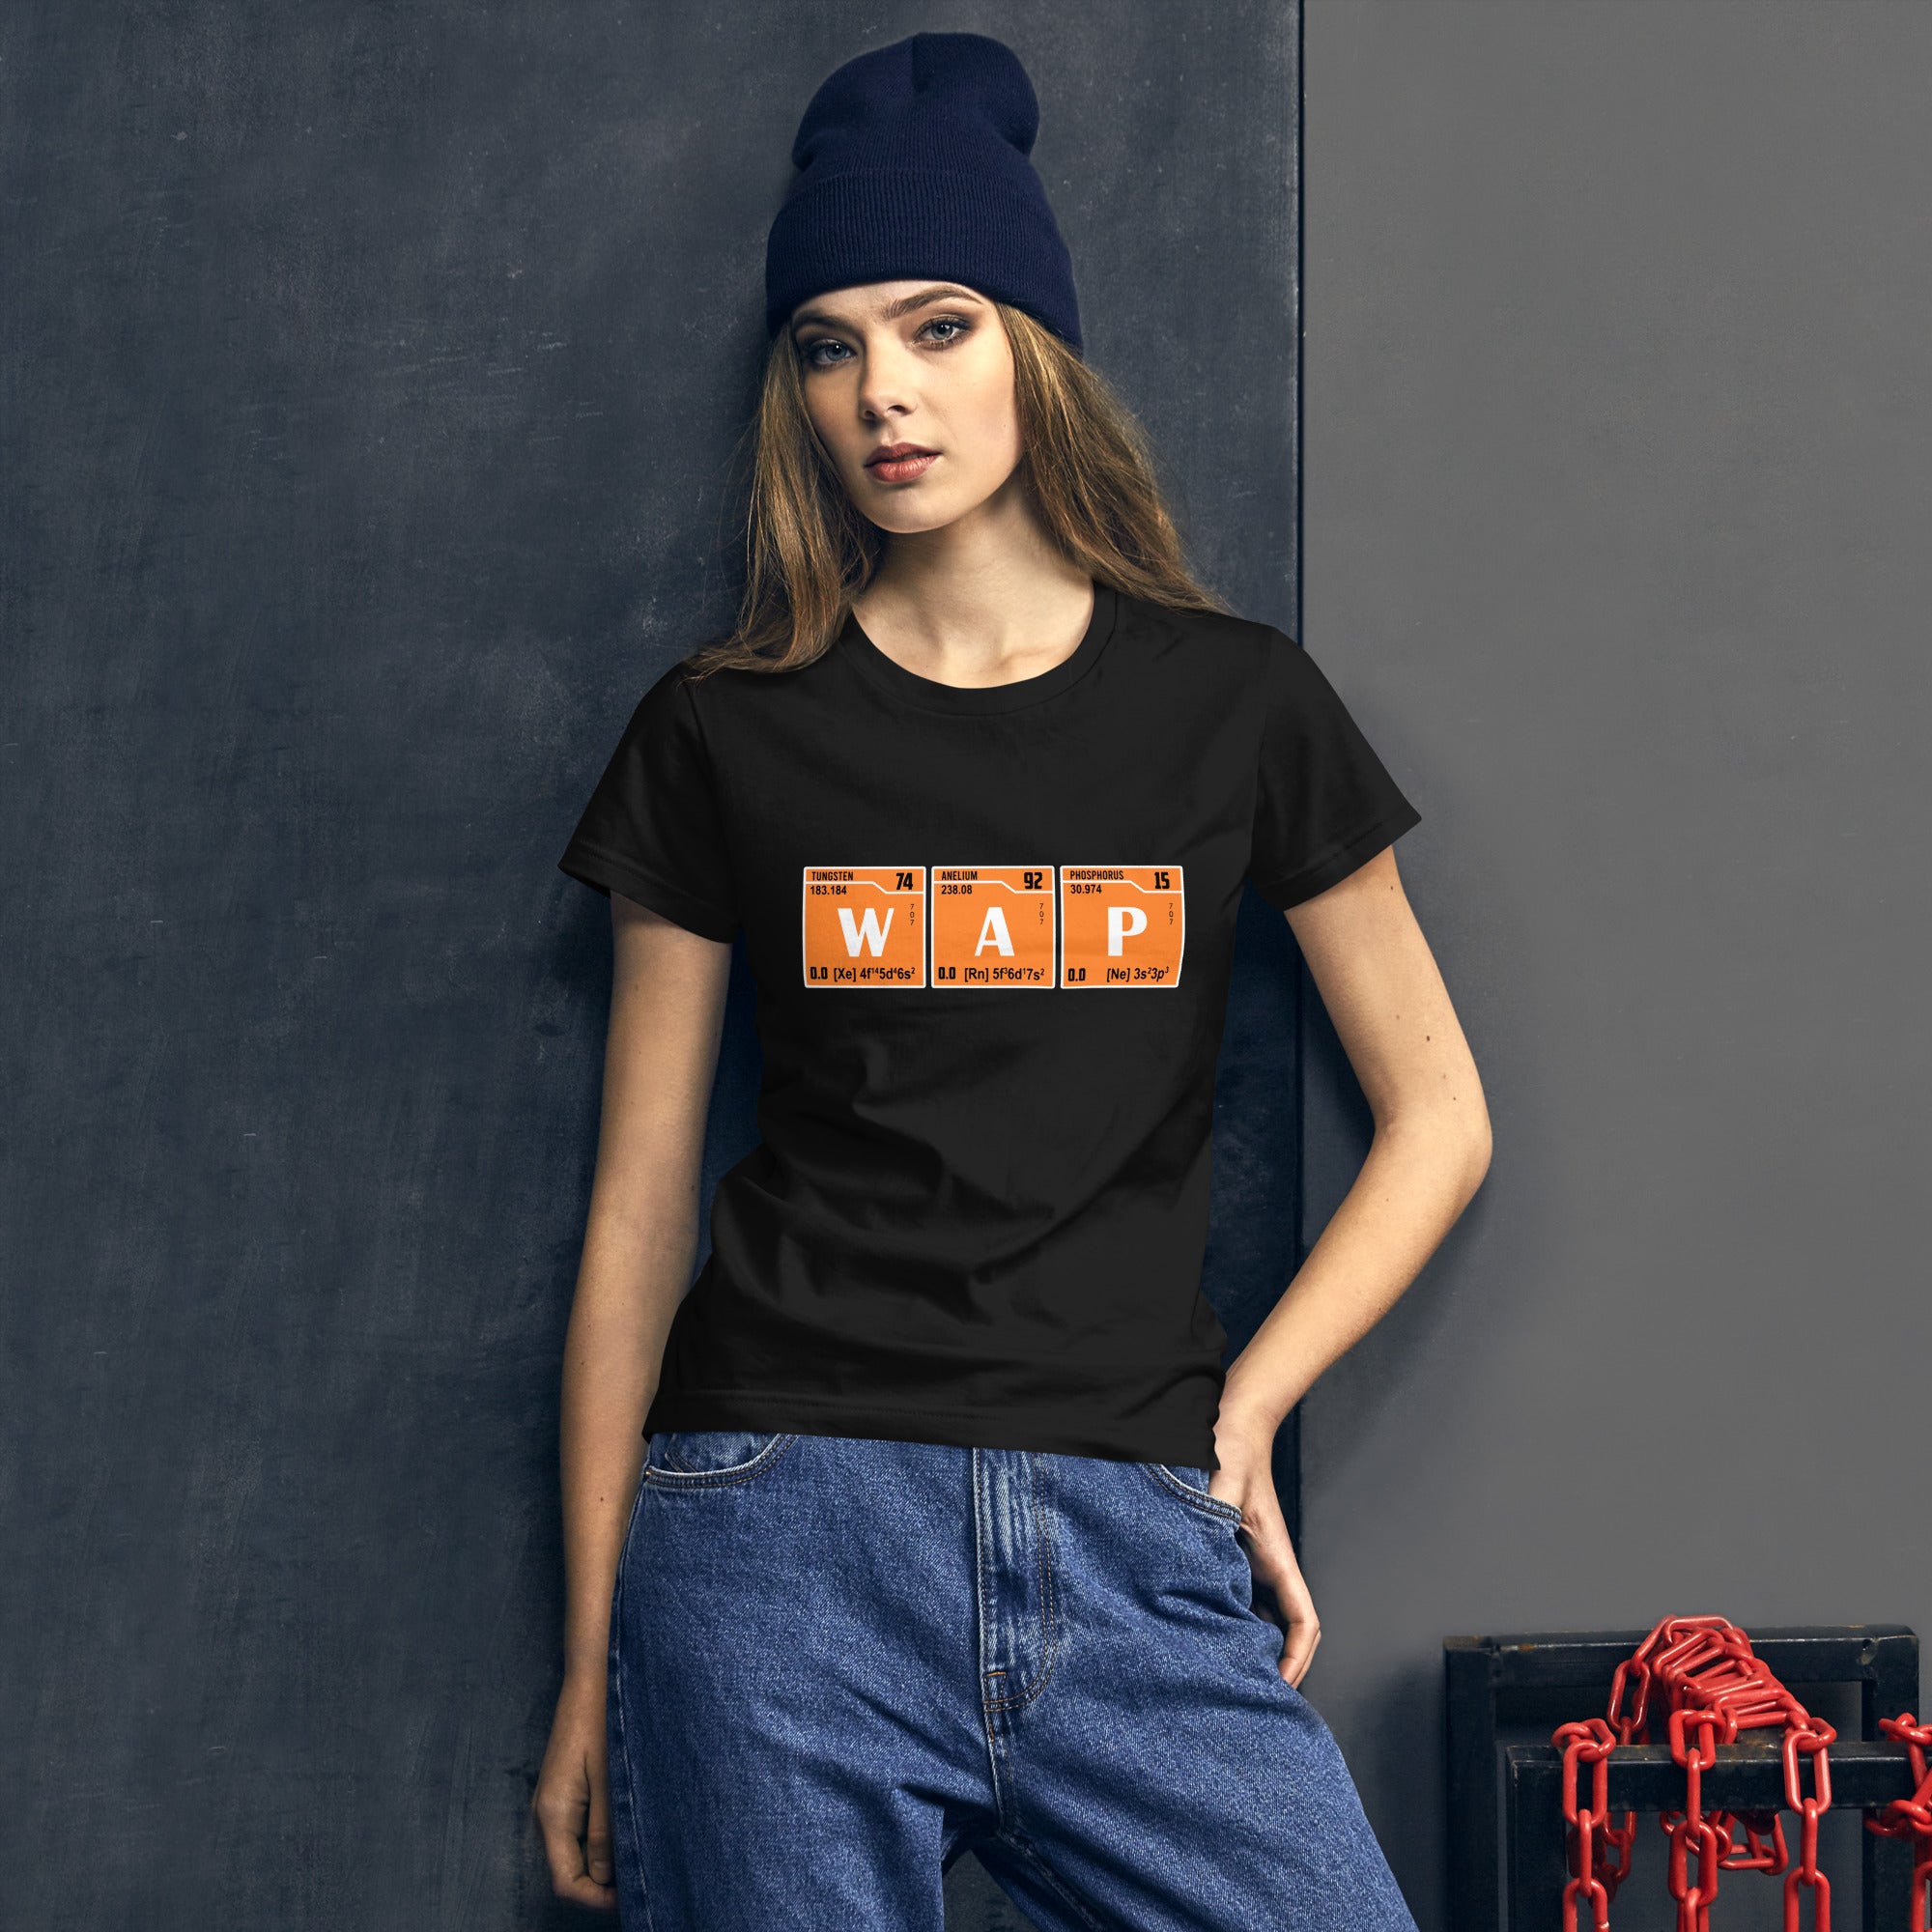 Geek Chic Alert: 'WAP' Periodic Table Tee - Science Meets Swagger!